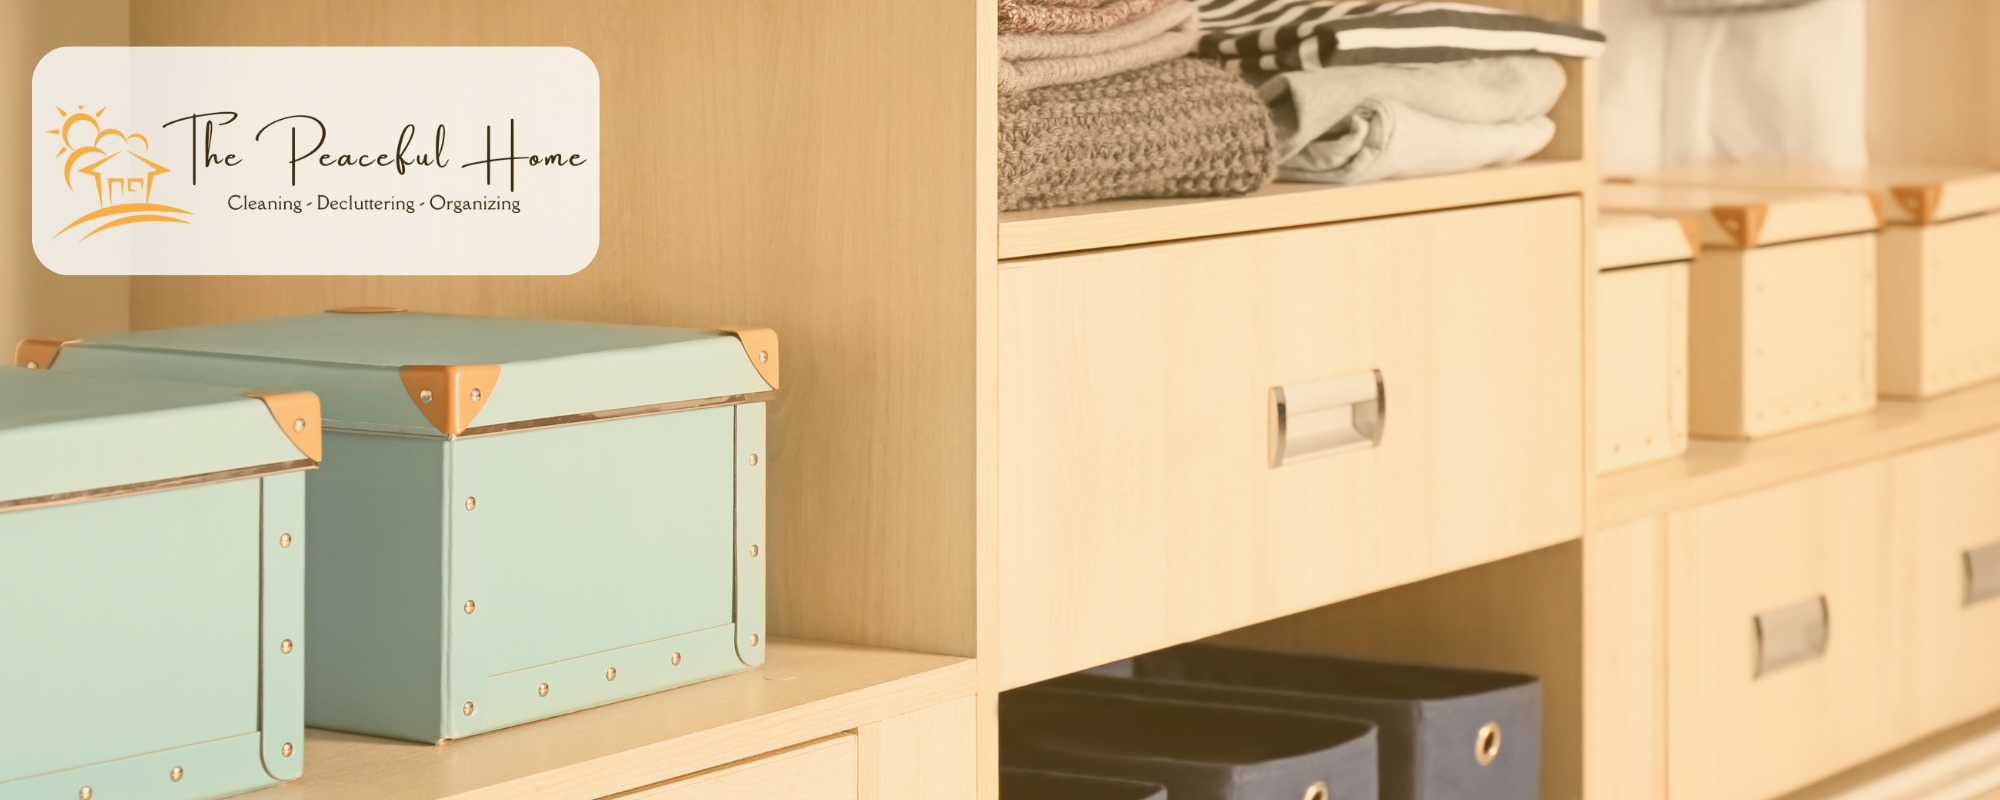 15 Things to Organize in Small Storage Containers